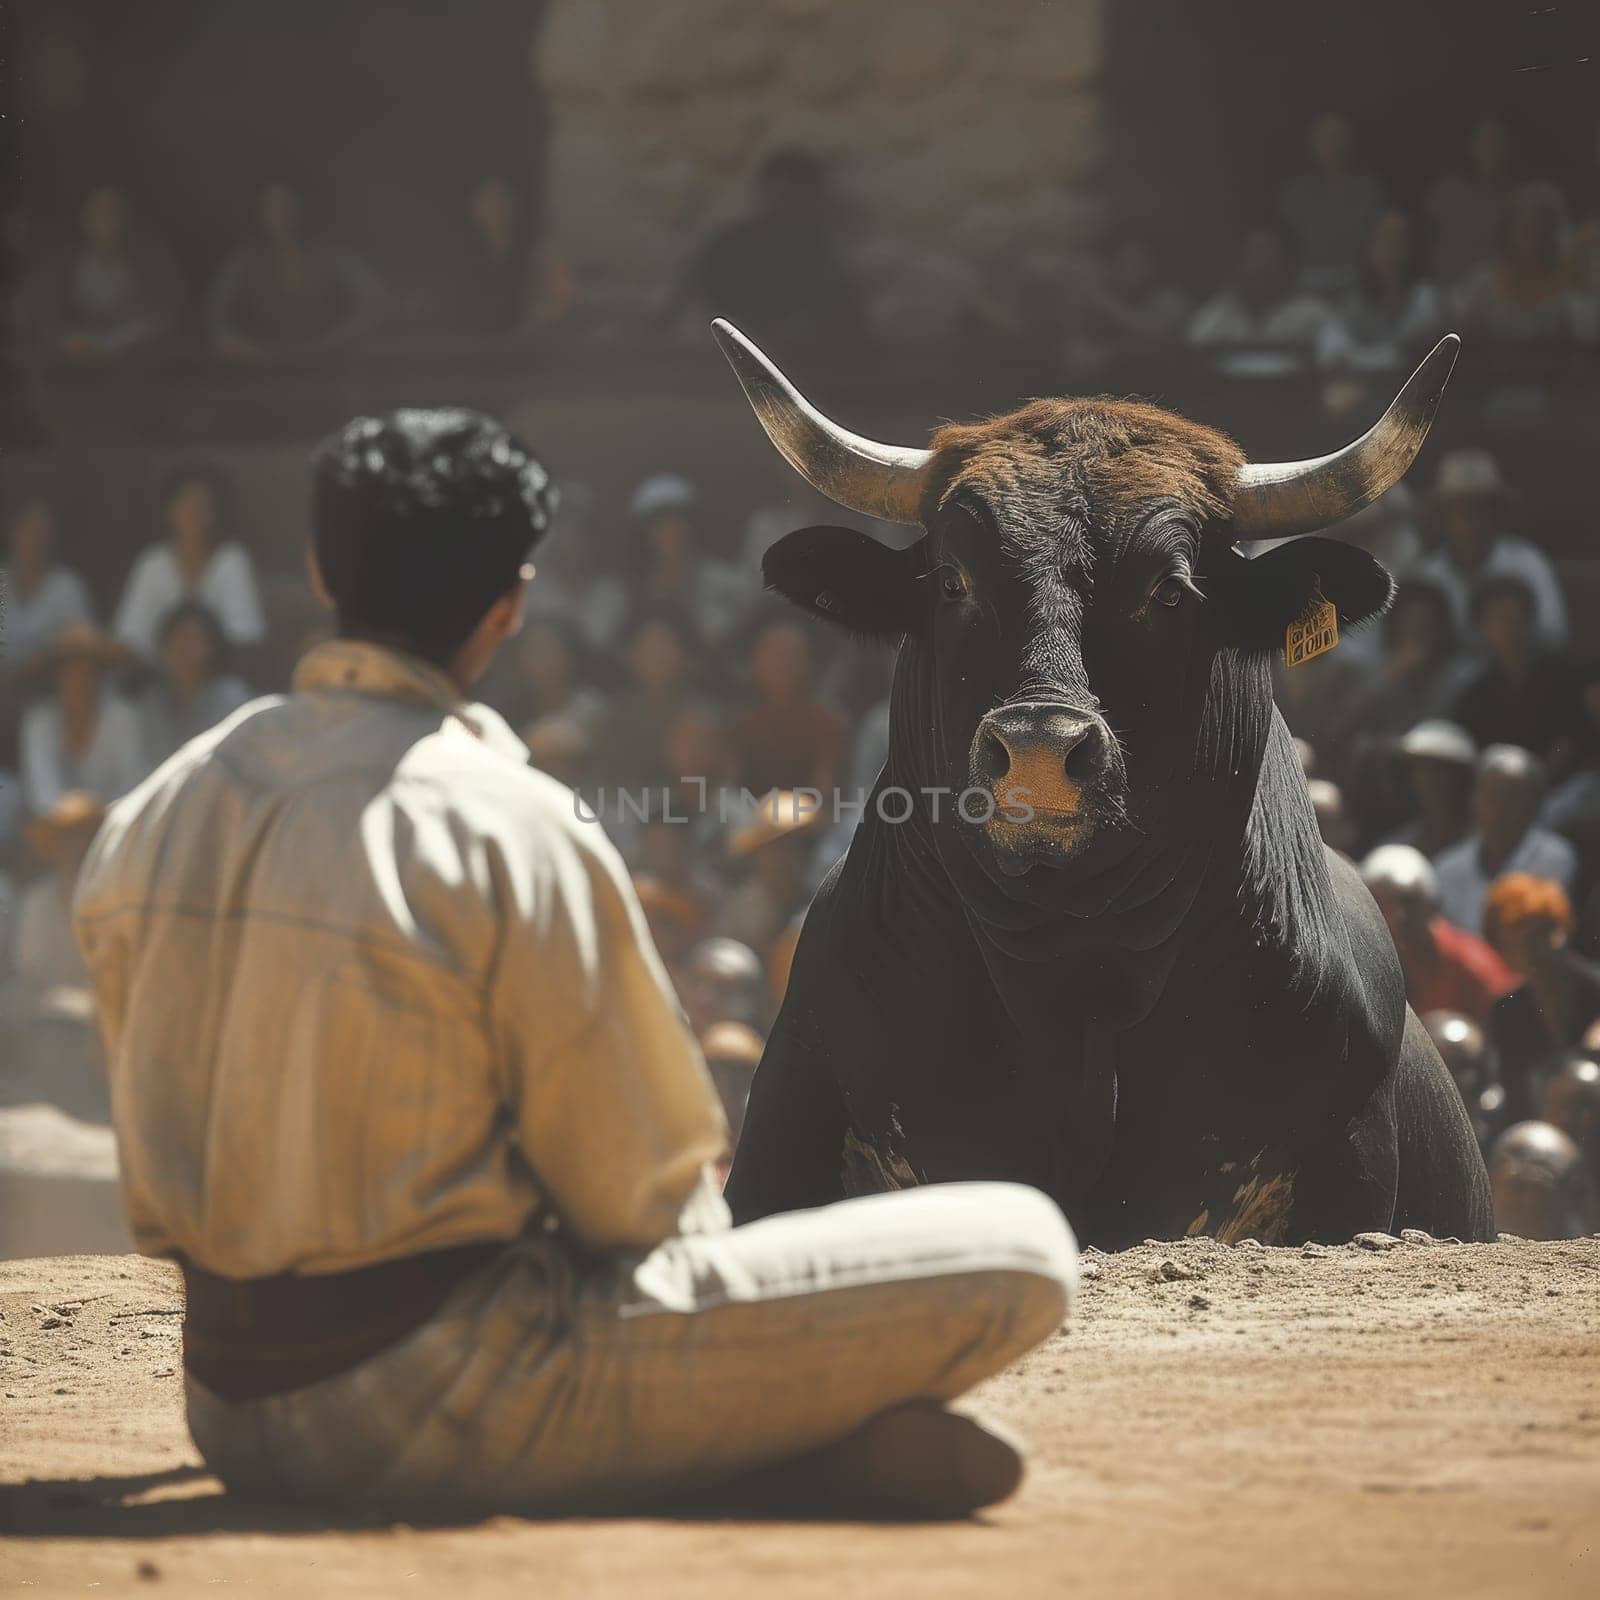 A matador in a decorative costume sits beside a resting bull, evoking a moment of calm. by sfinks